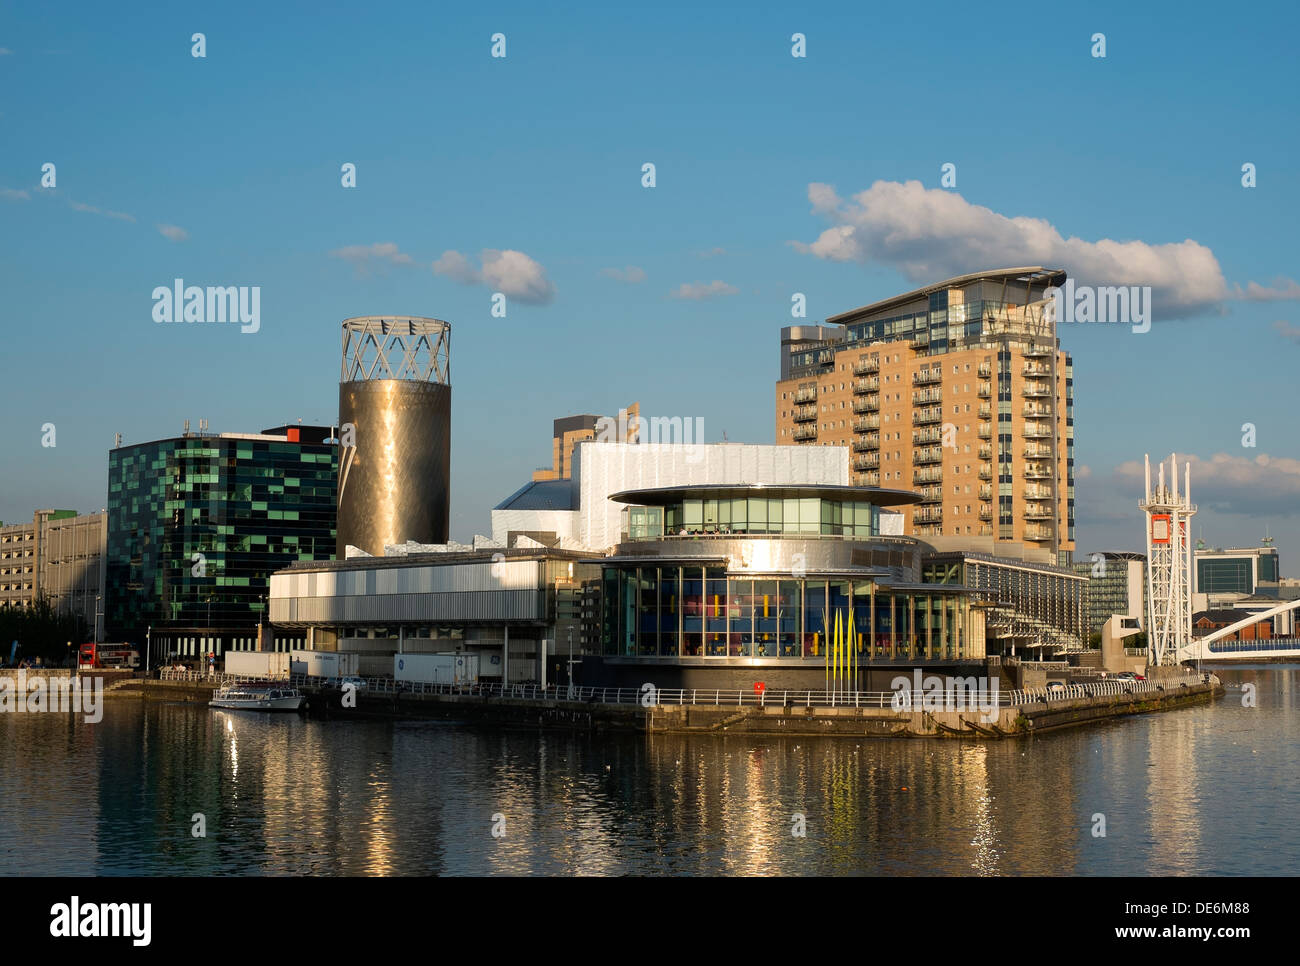 England, Greater Manchester, Salford Quays, Lowry Theatre Stock Photo